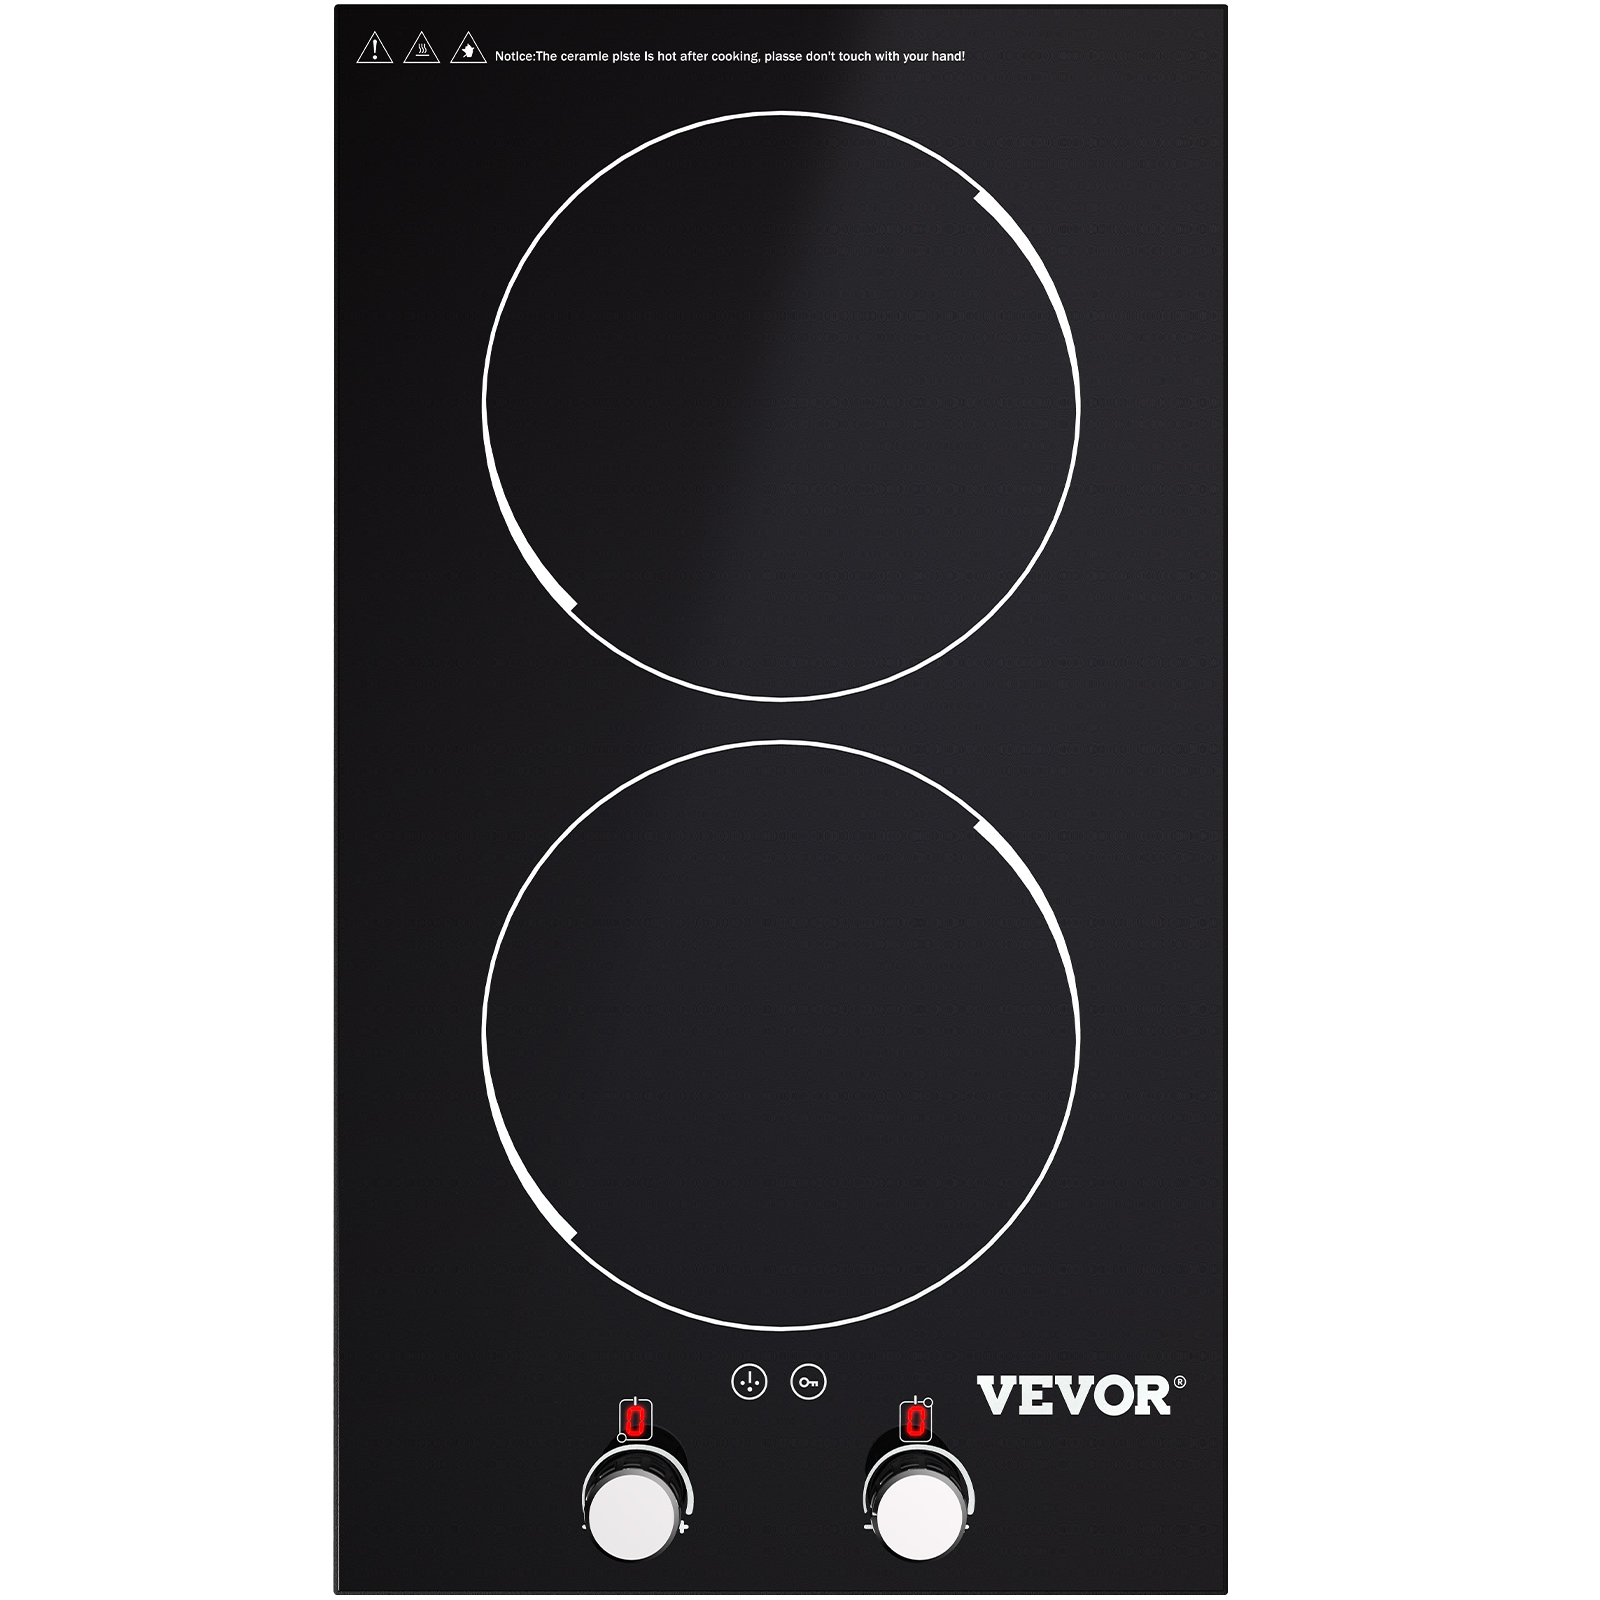 VEVOR Built-in Induction Cooktop, 11 inch Burners, 120V Ceramic Glass  Electric Stove Top with